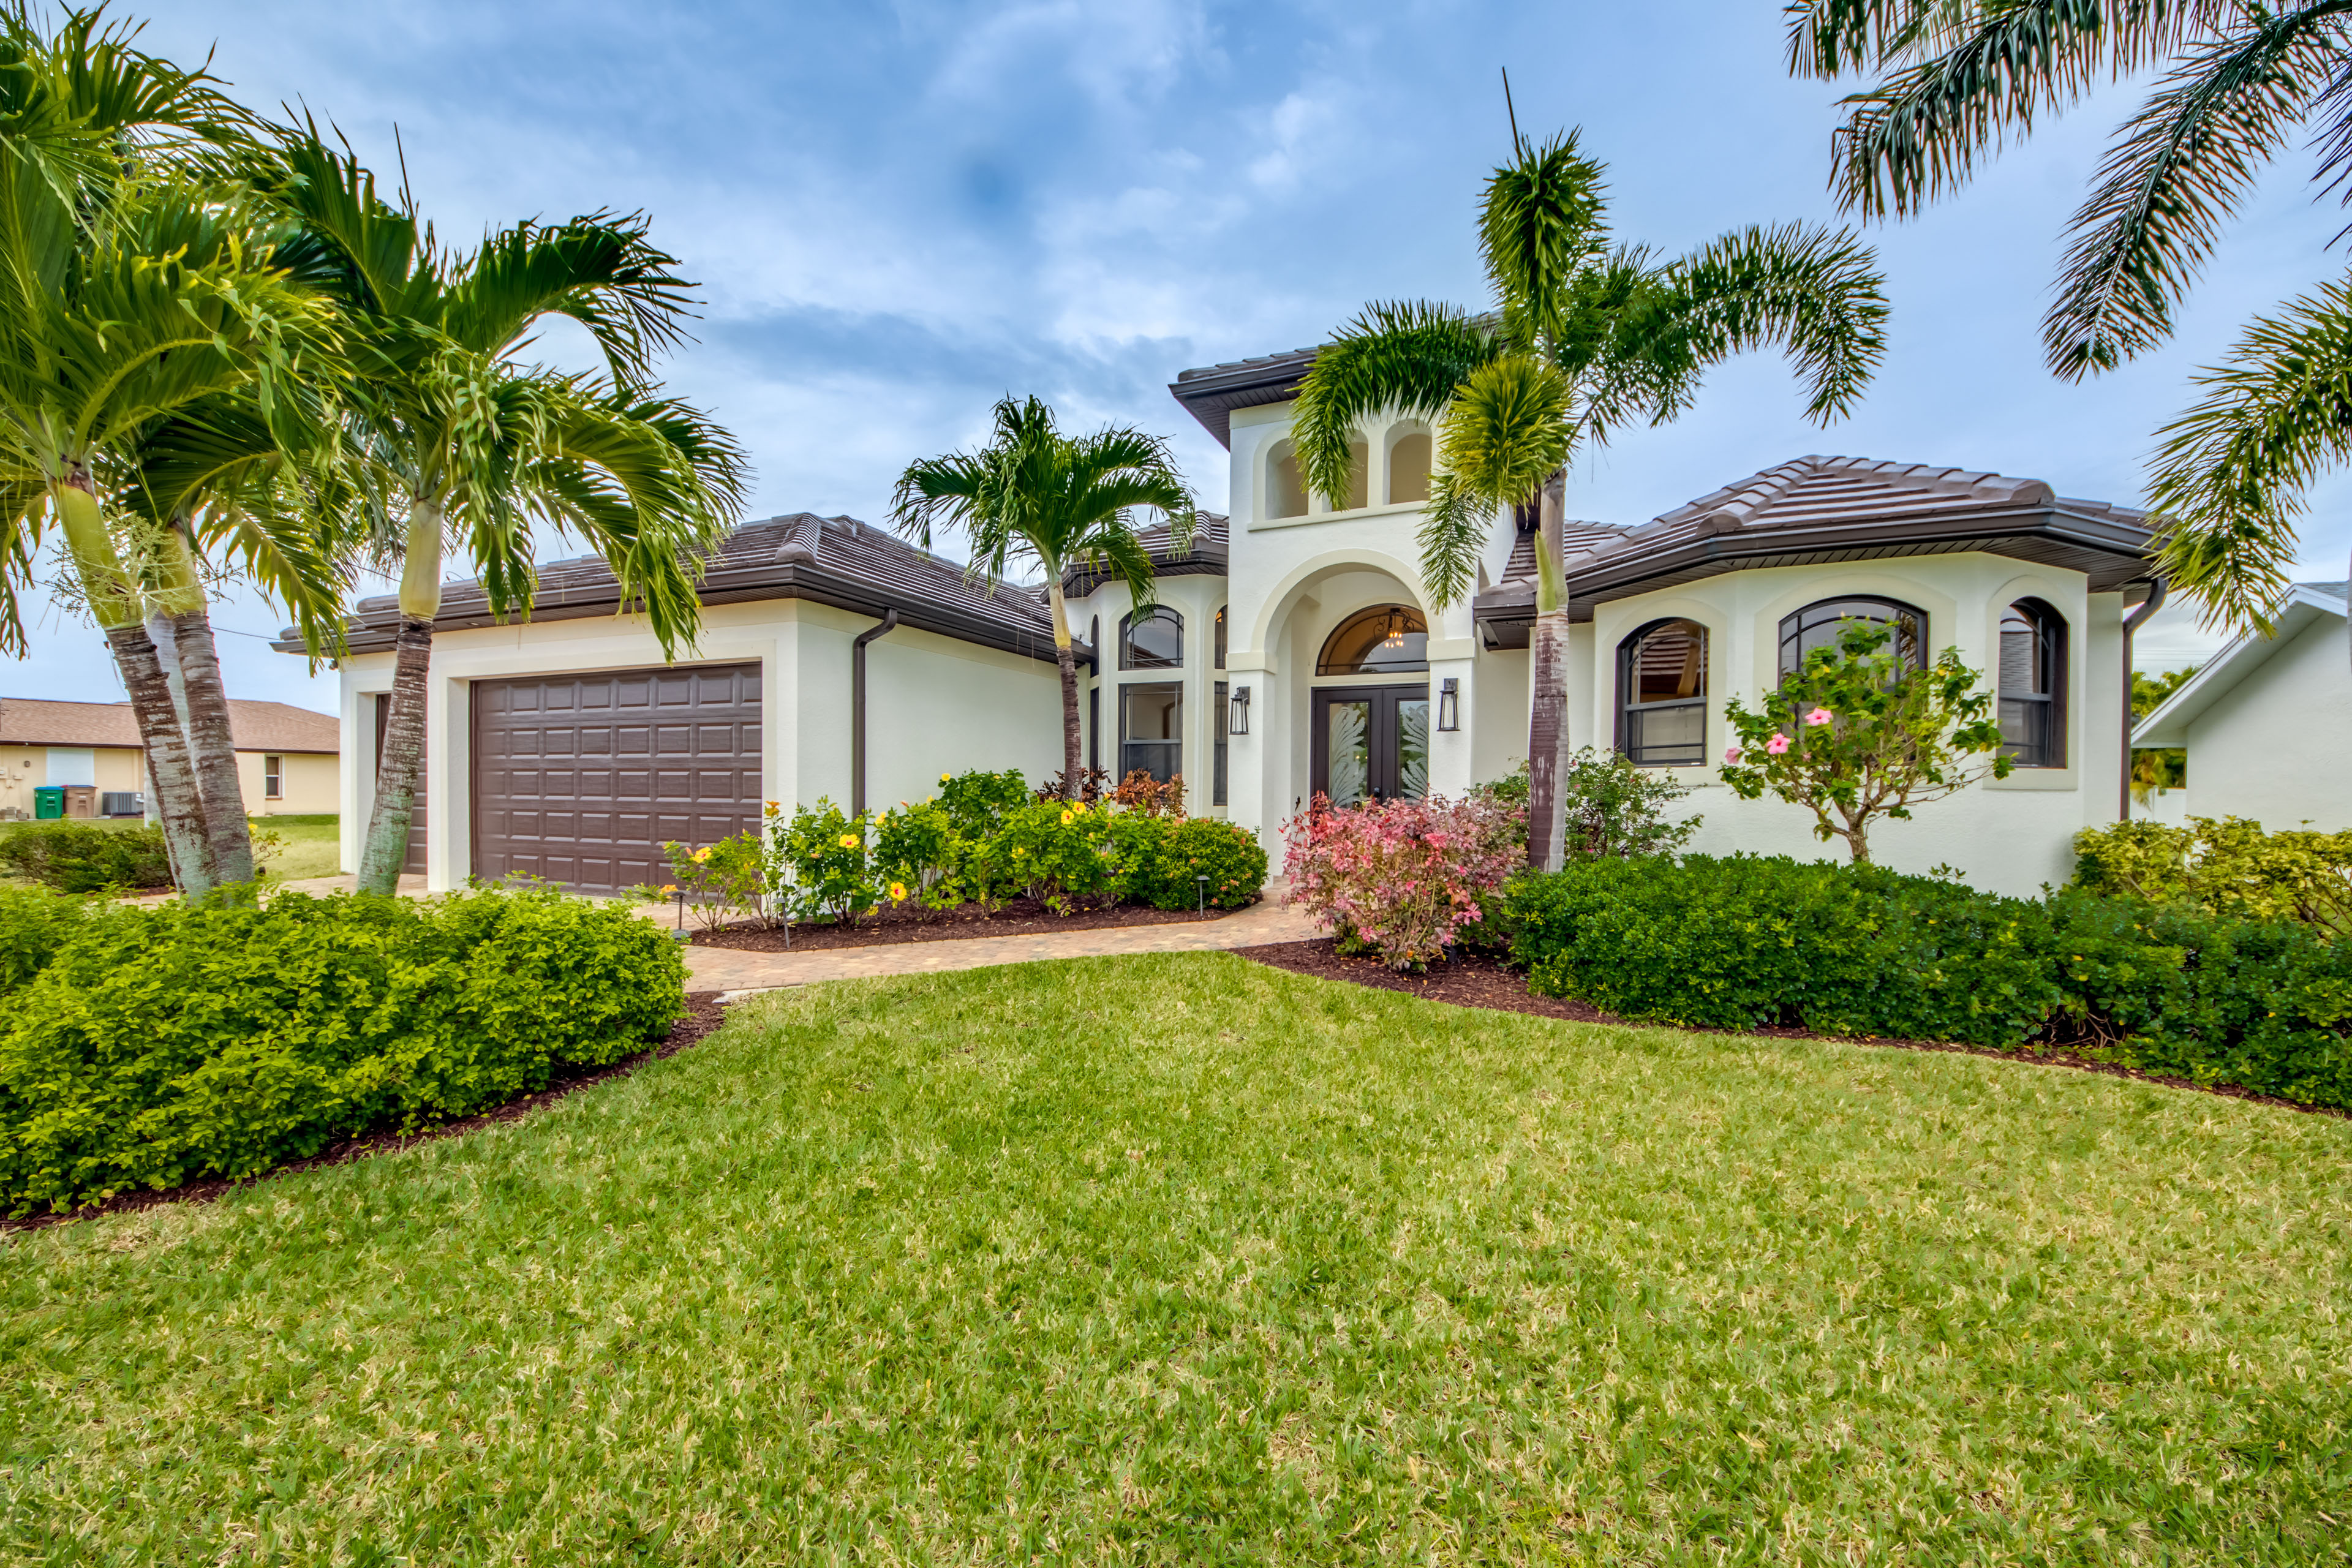 Property Image 2 - Beautiful Cape Coral Home w/ Private Outdoor Oasis